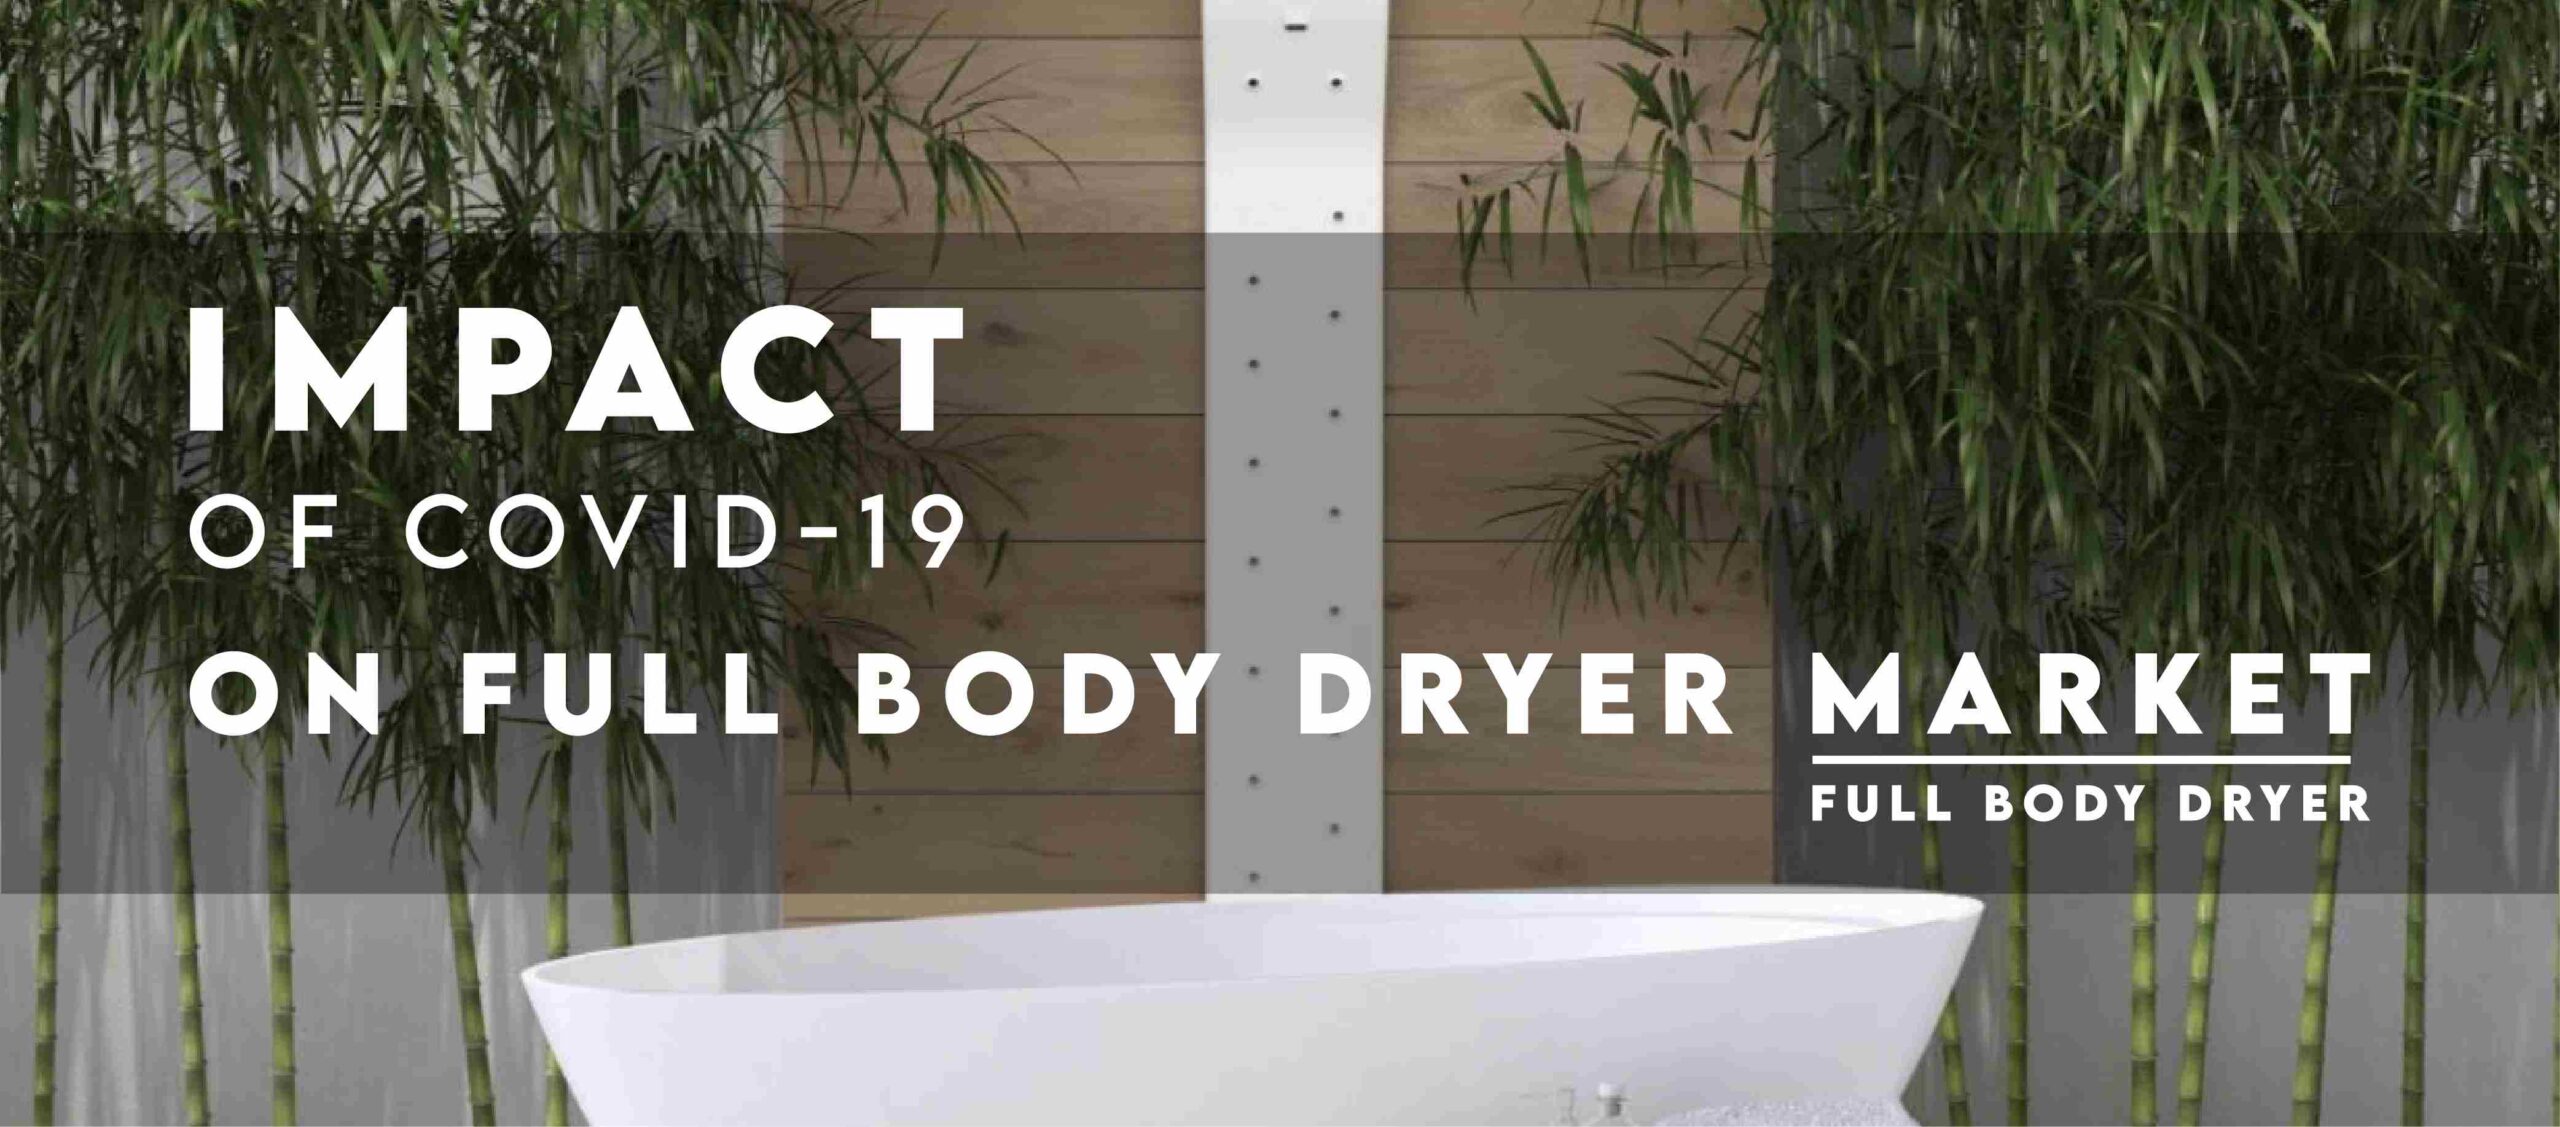 Best Experience Of Body Dryer